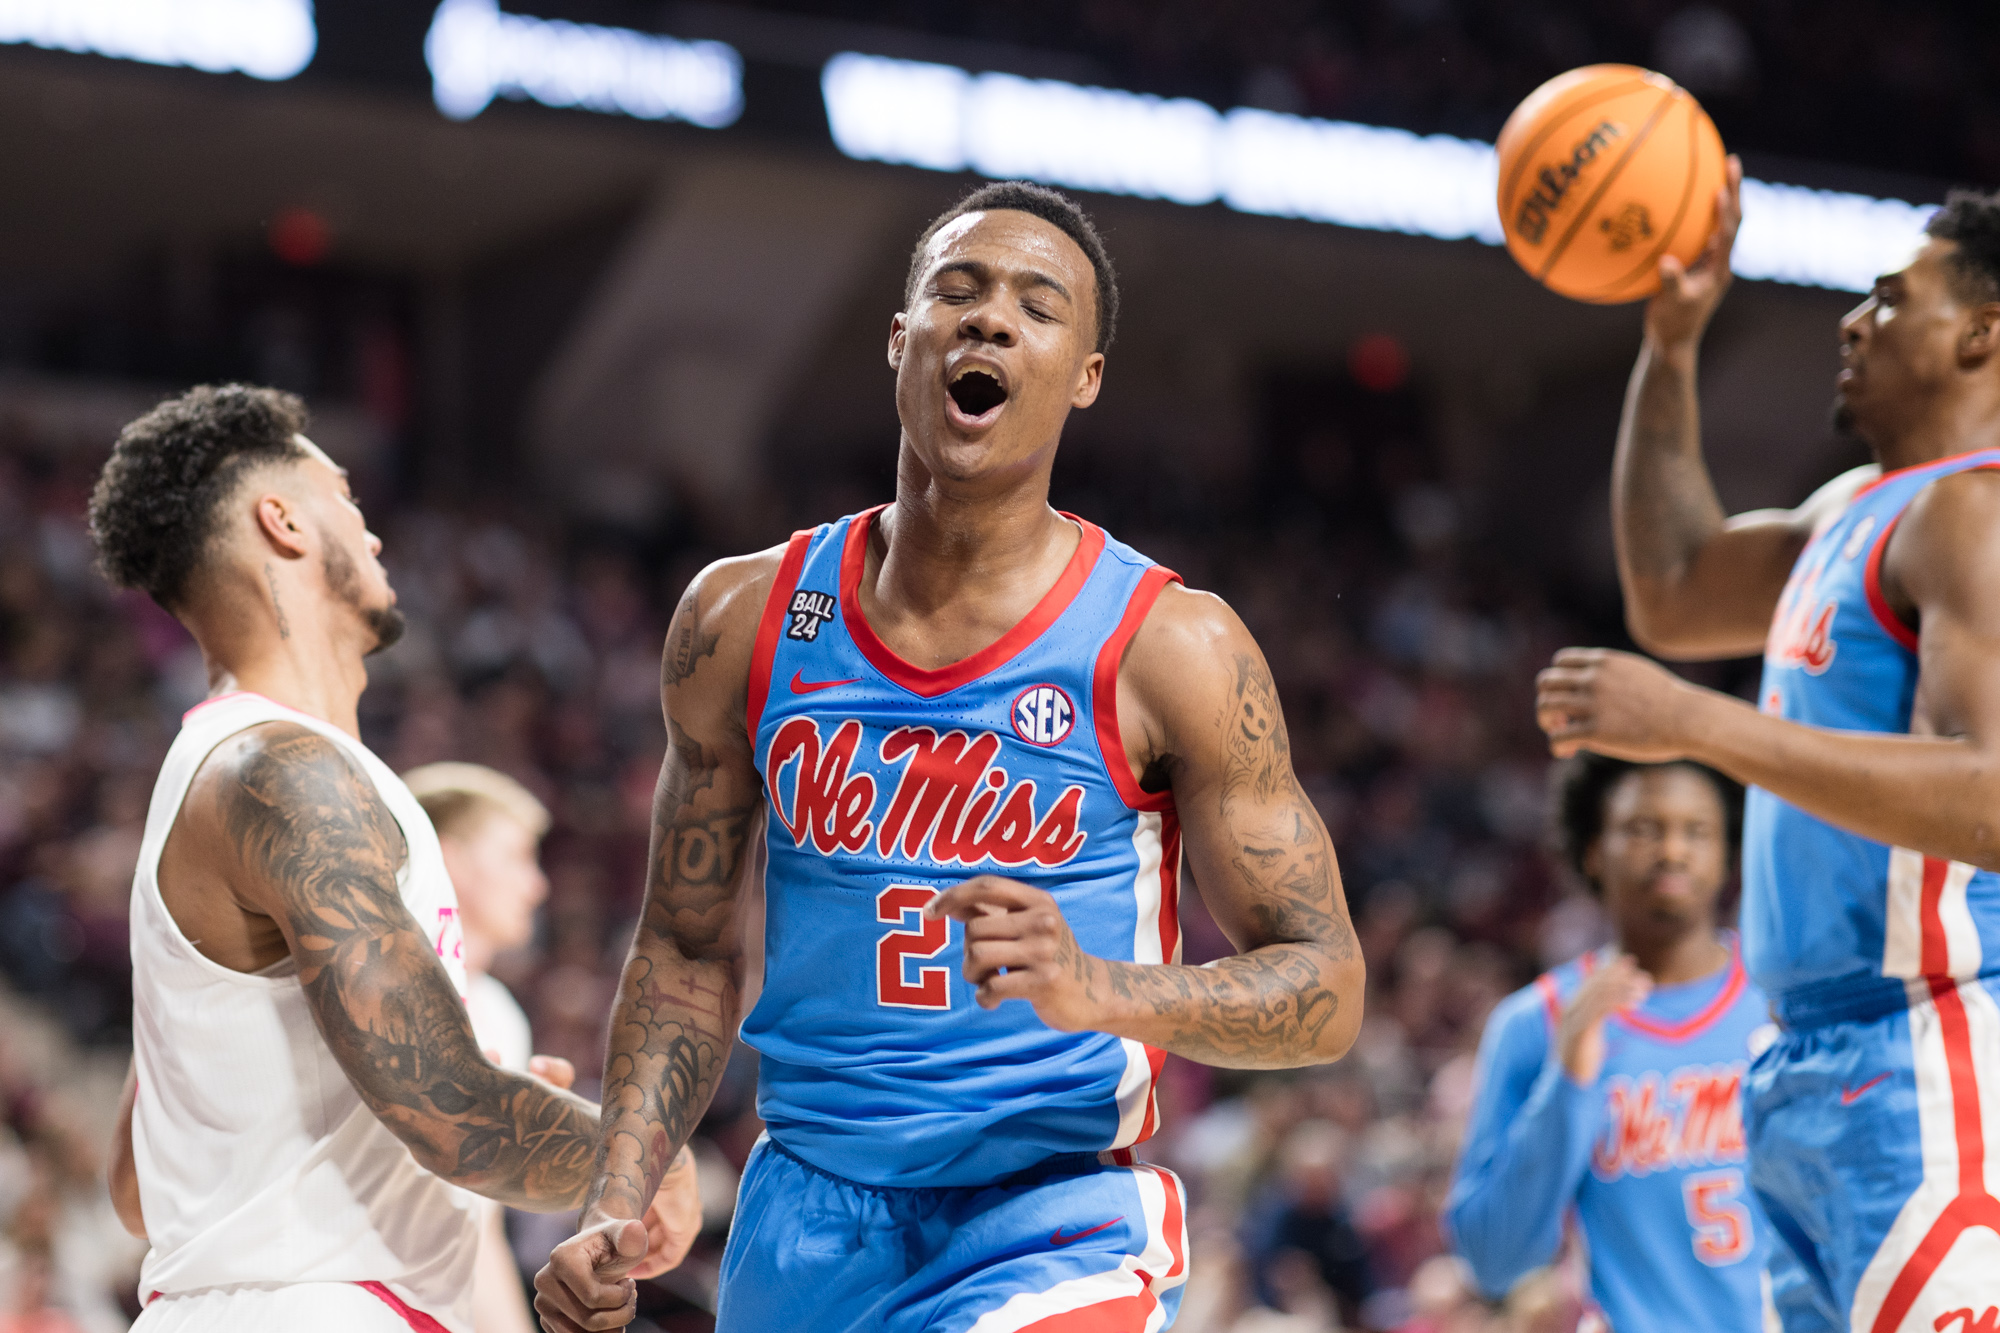 GALLERY%3A+Mens+Basketball+vs.+Mississippi